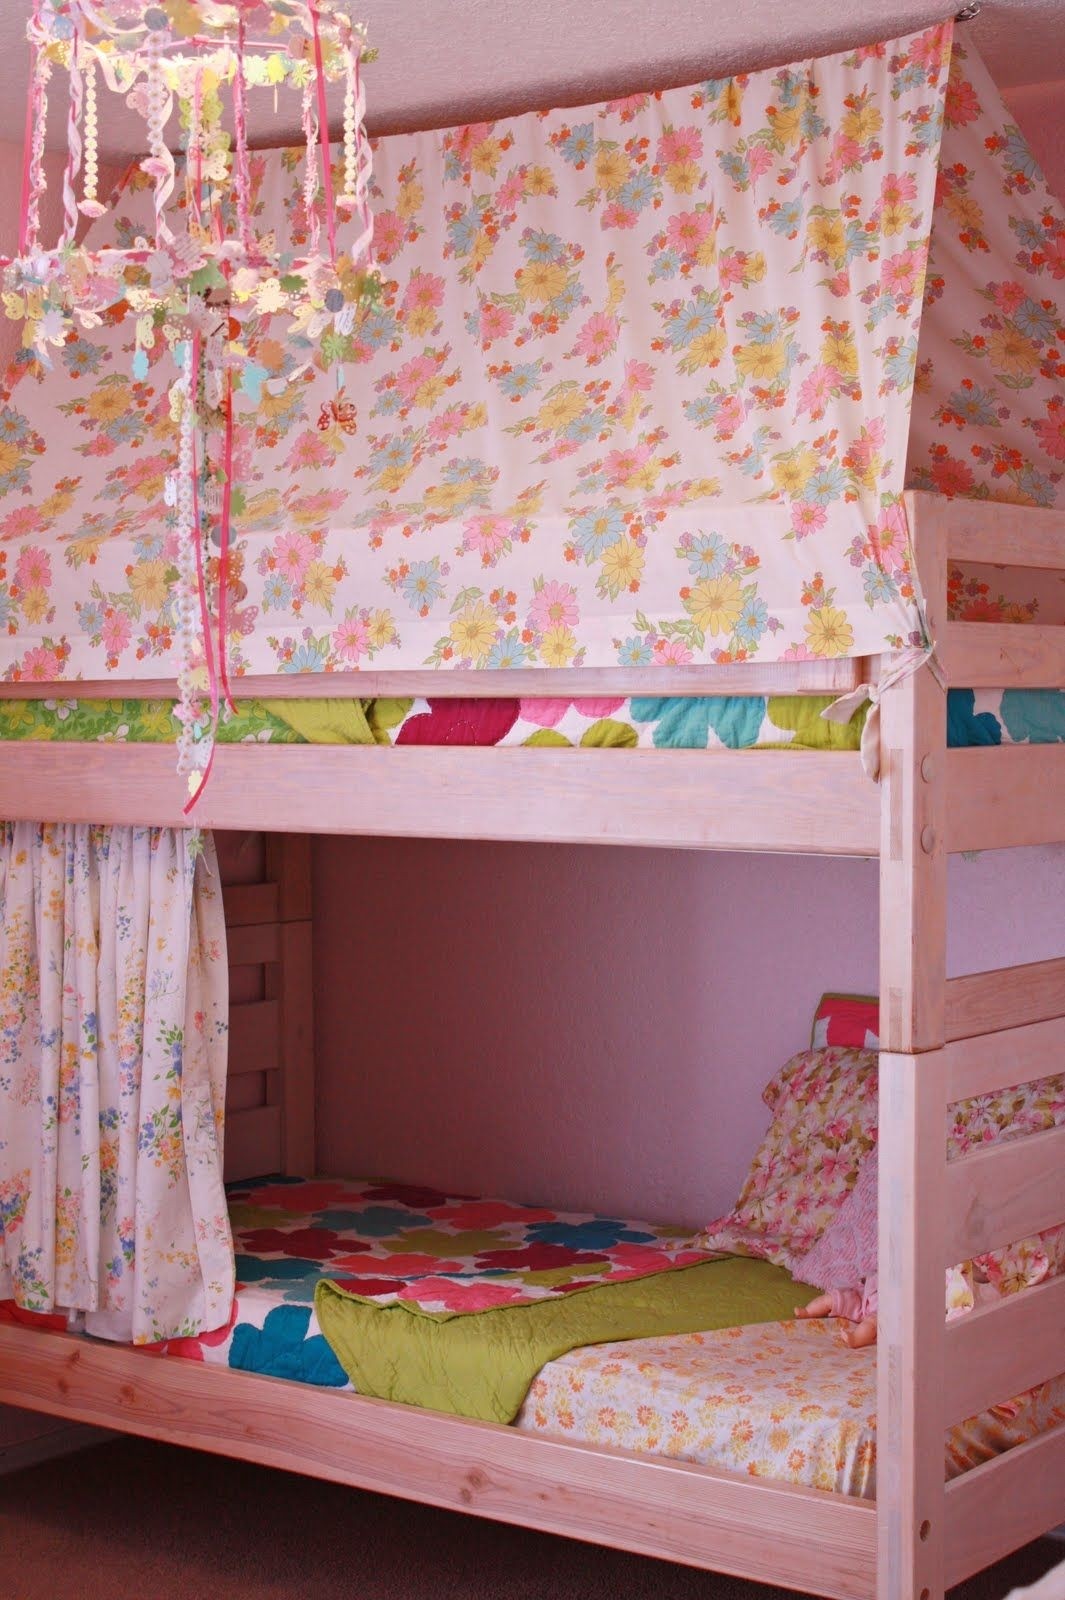 Girly bunk beds